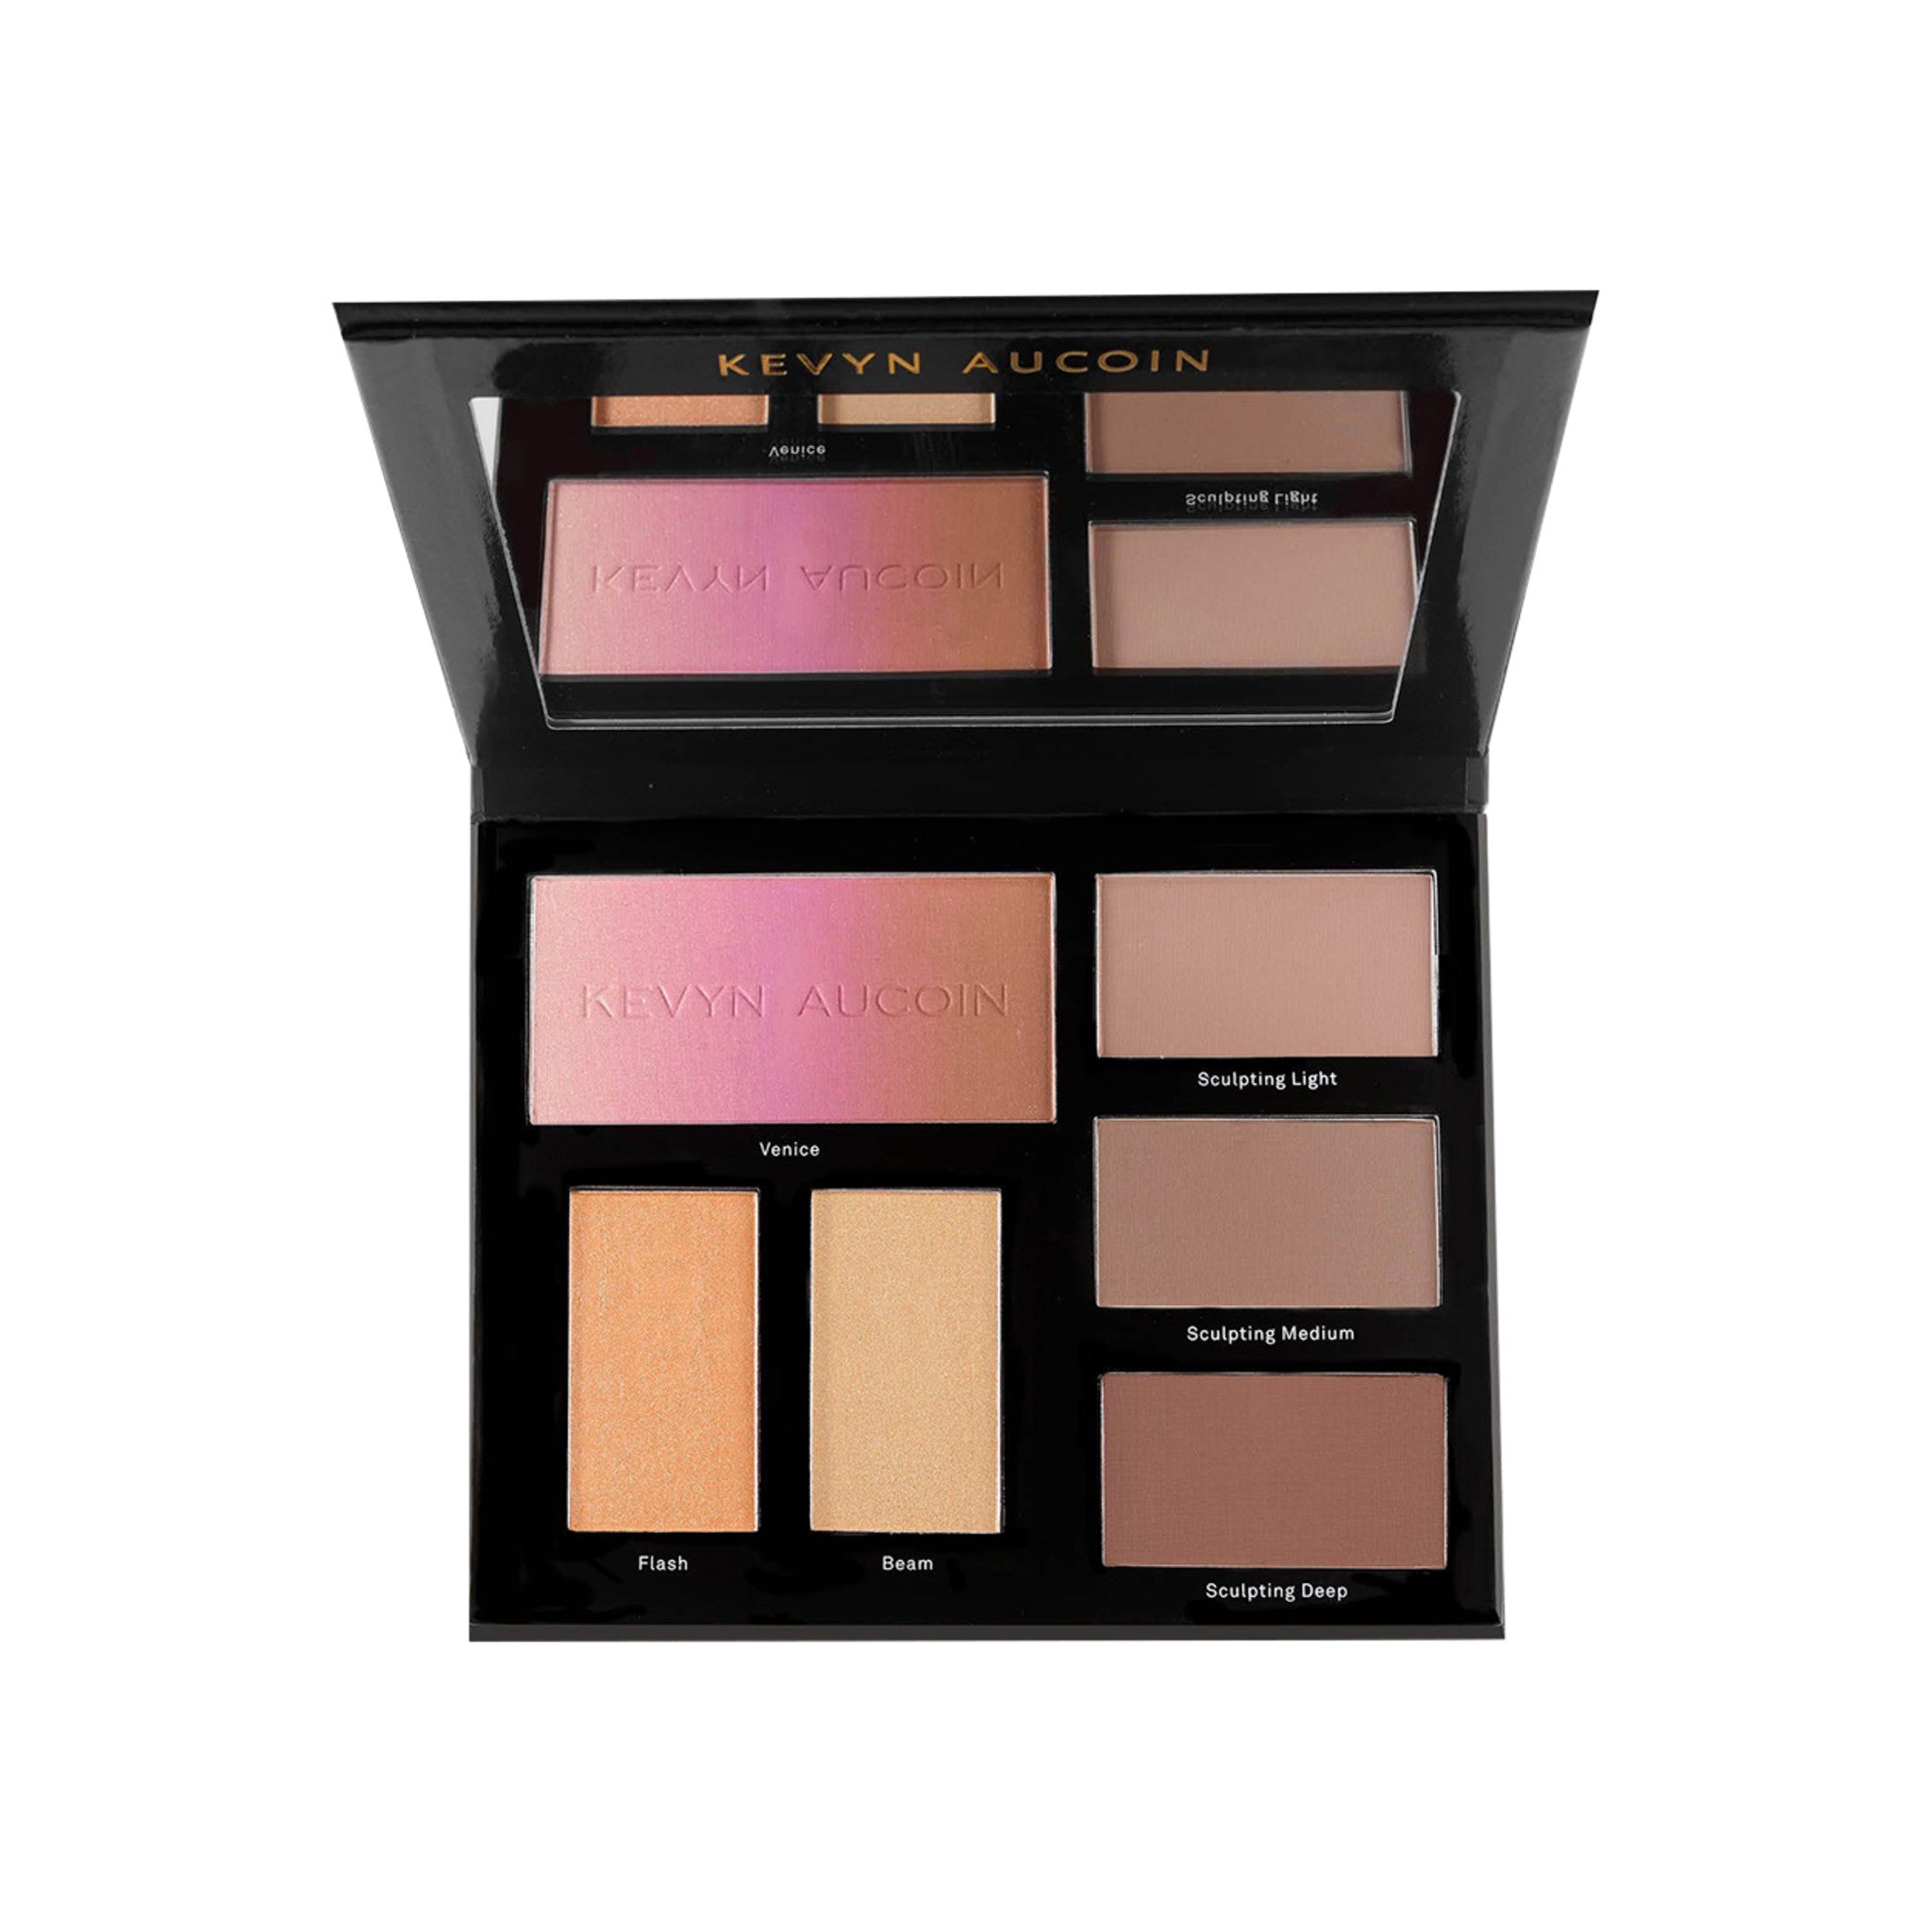 Kevyn Aucoin The Contour Book - The Art of Sculpting and Defining Volume III main image. This product is in the color multi, for light and medium and deep complexions